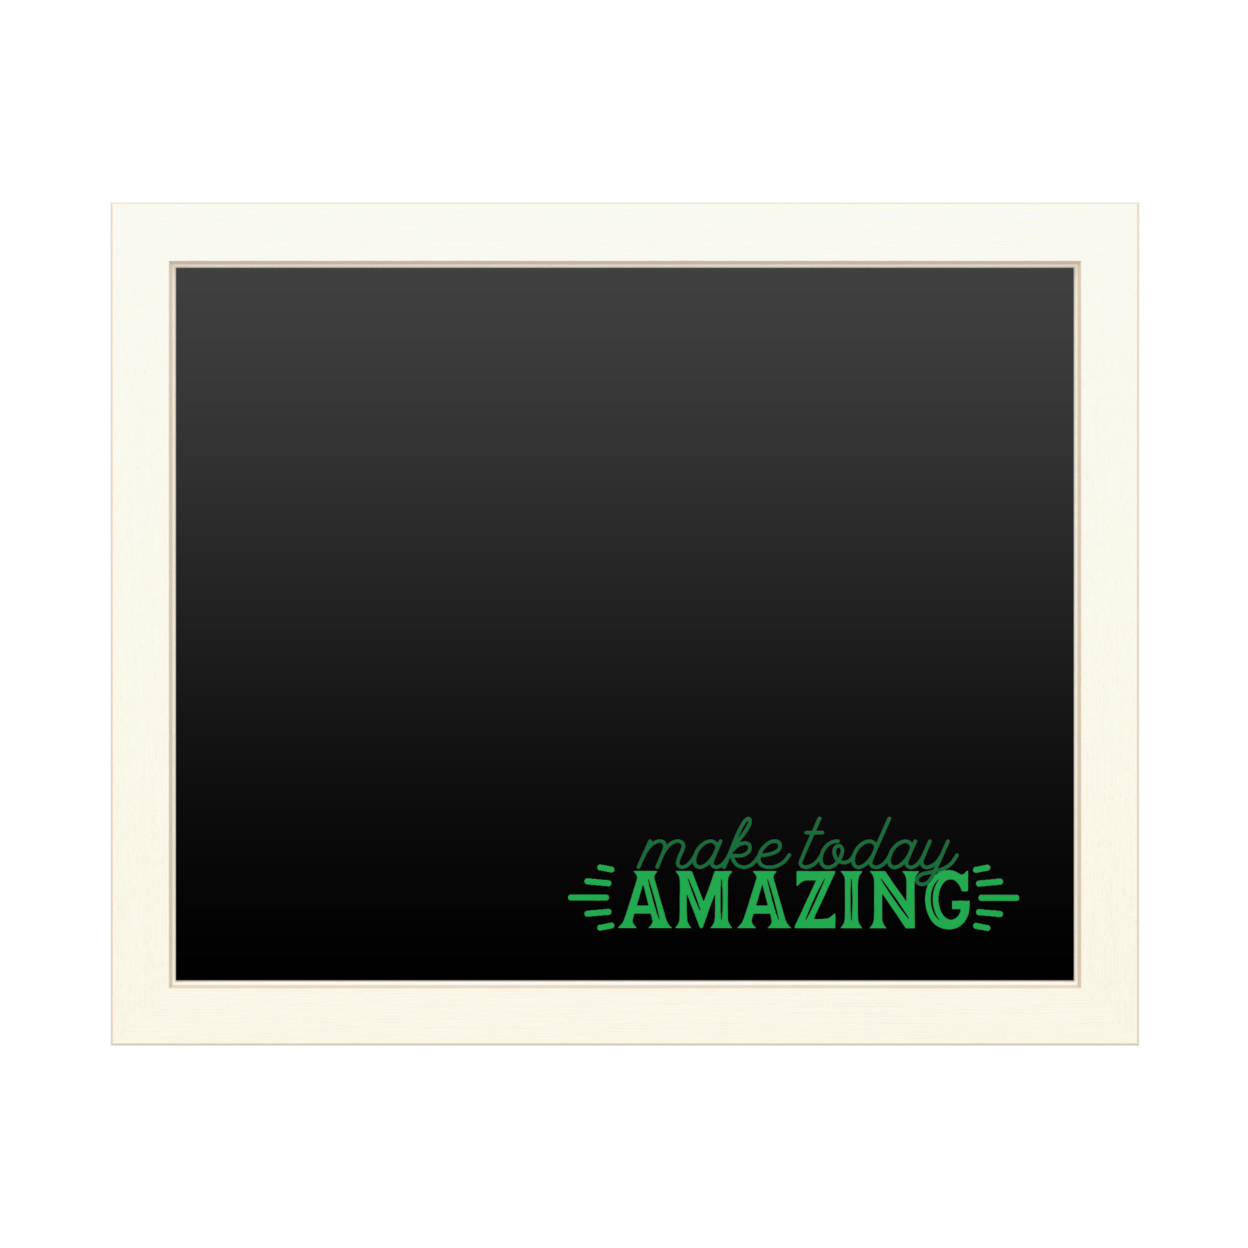 16 X 20 Chalk Board With Printed Artwork - Make Today Amazing Green White Board - Ready To Hang Chalkboard